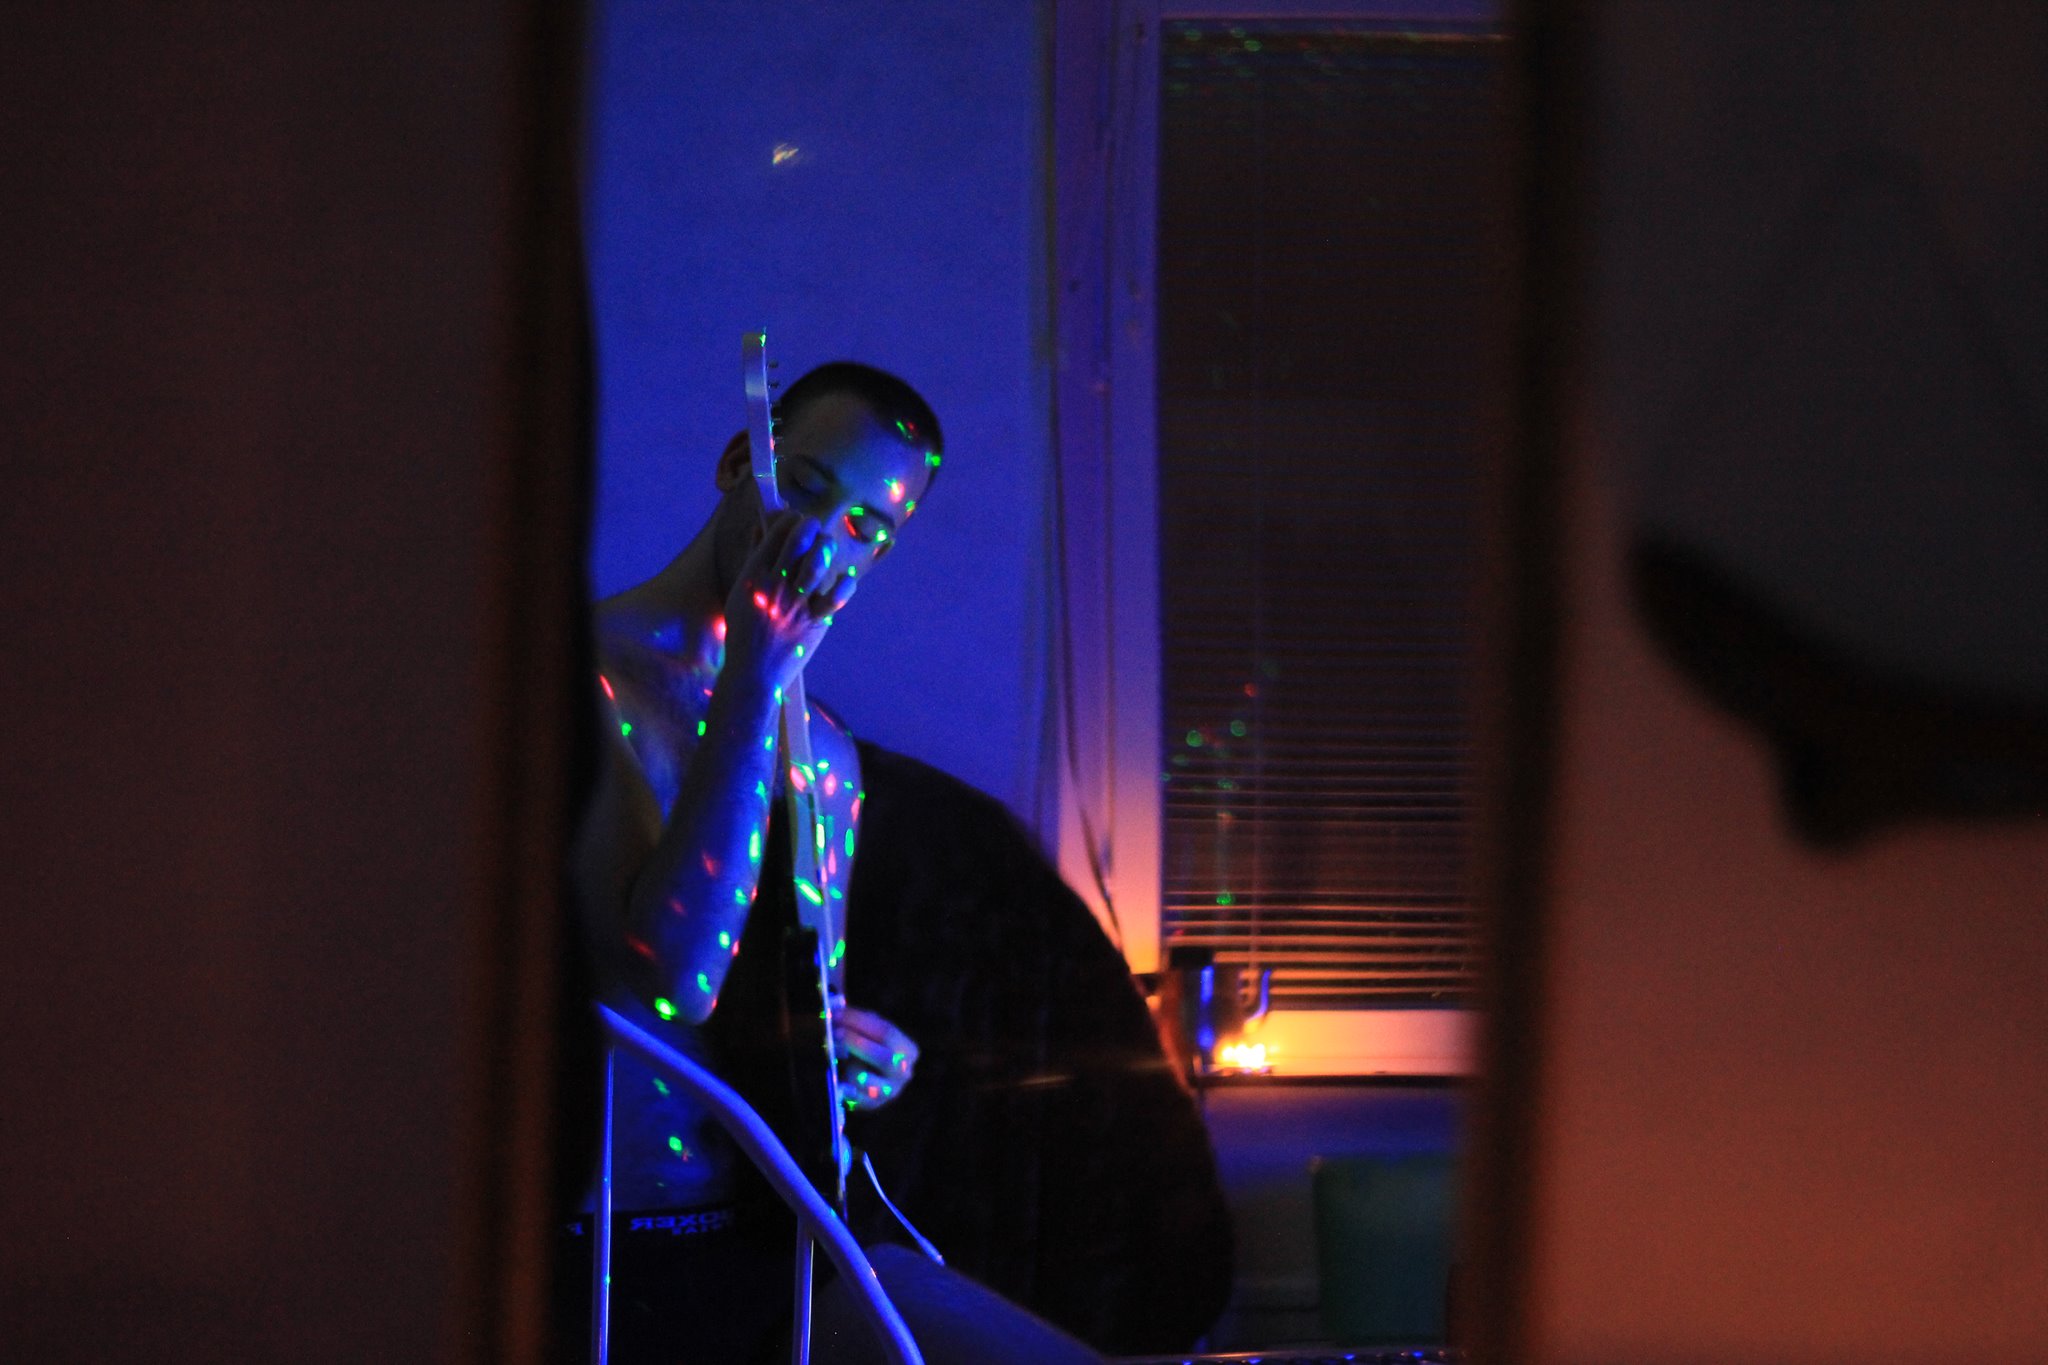 An image of me from 2014, playing a music rhythm game with a guitar, illuminated by candlelight and laser beams